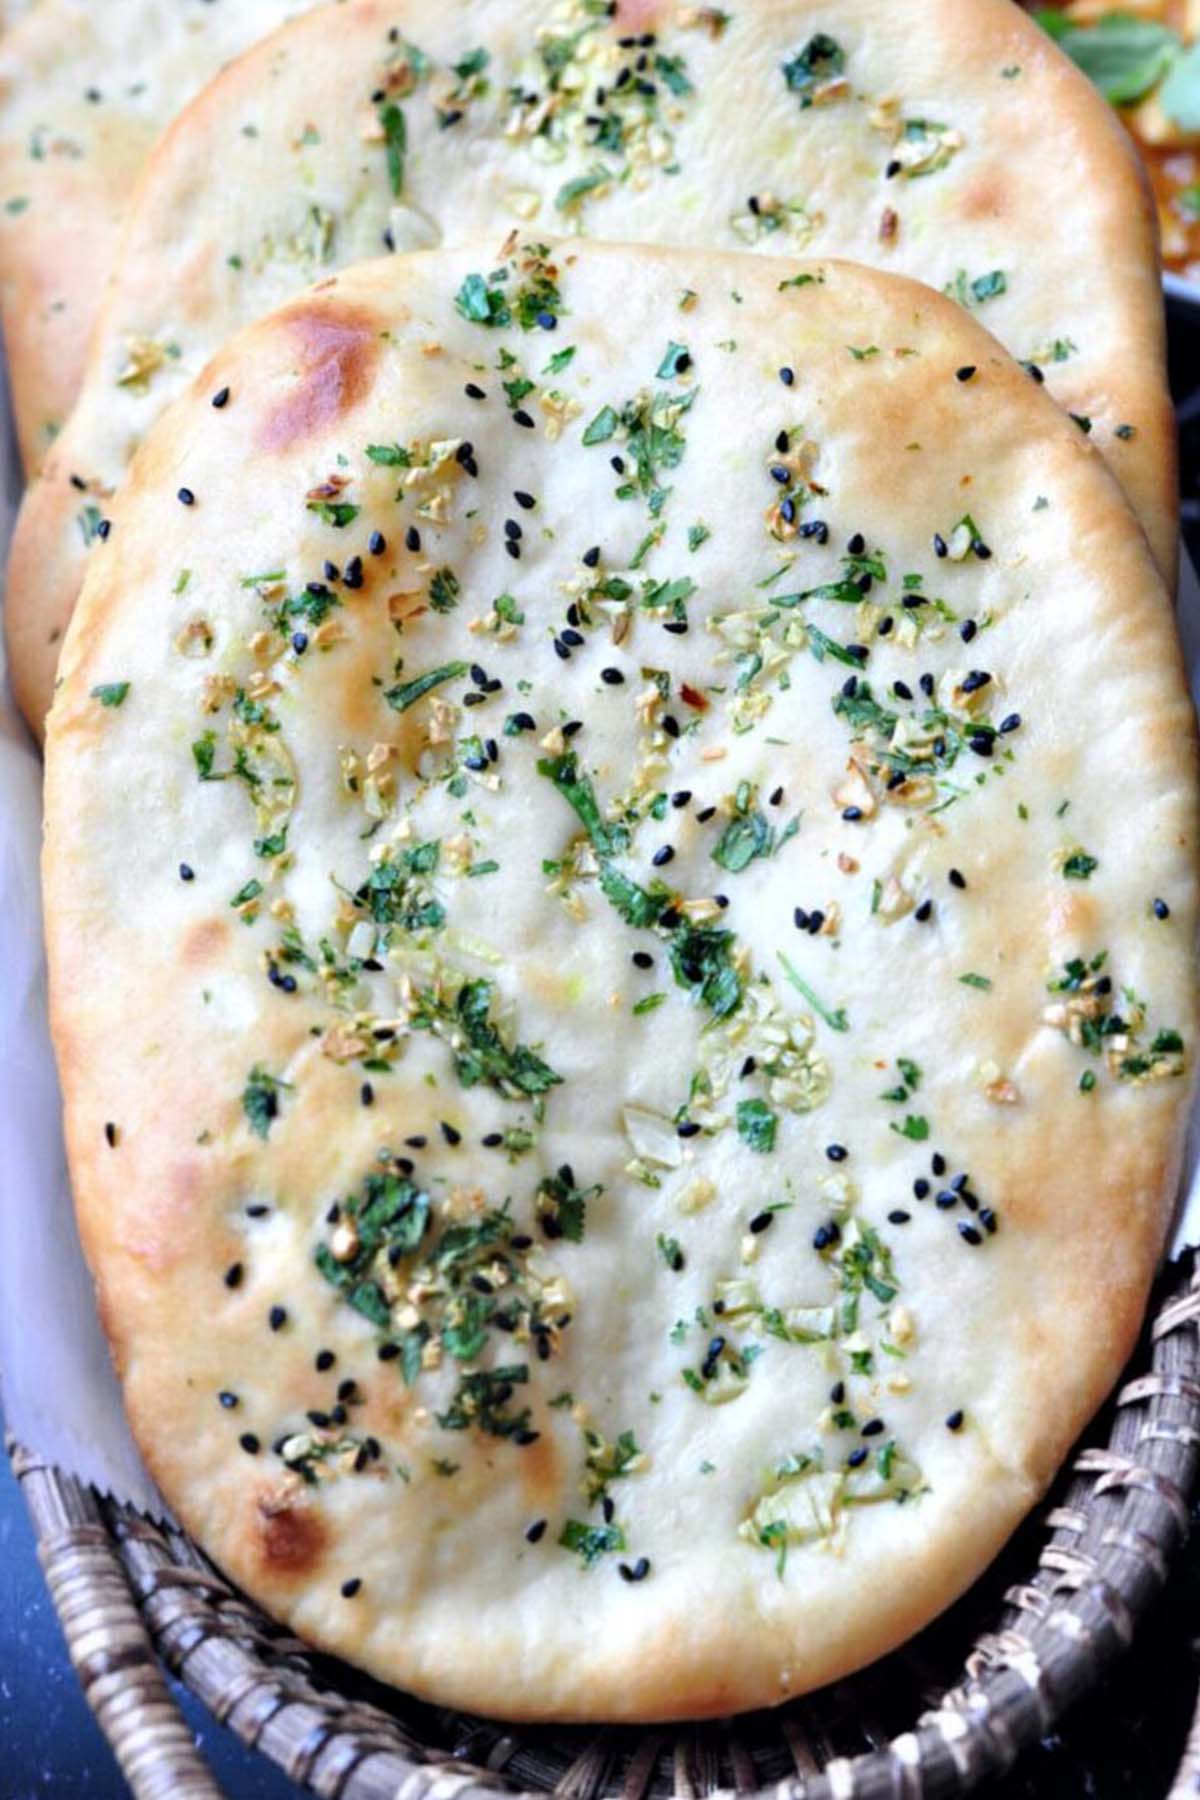 naan bread topped with parsley and sesame seeds.